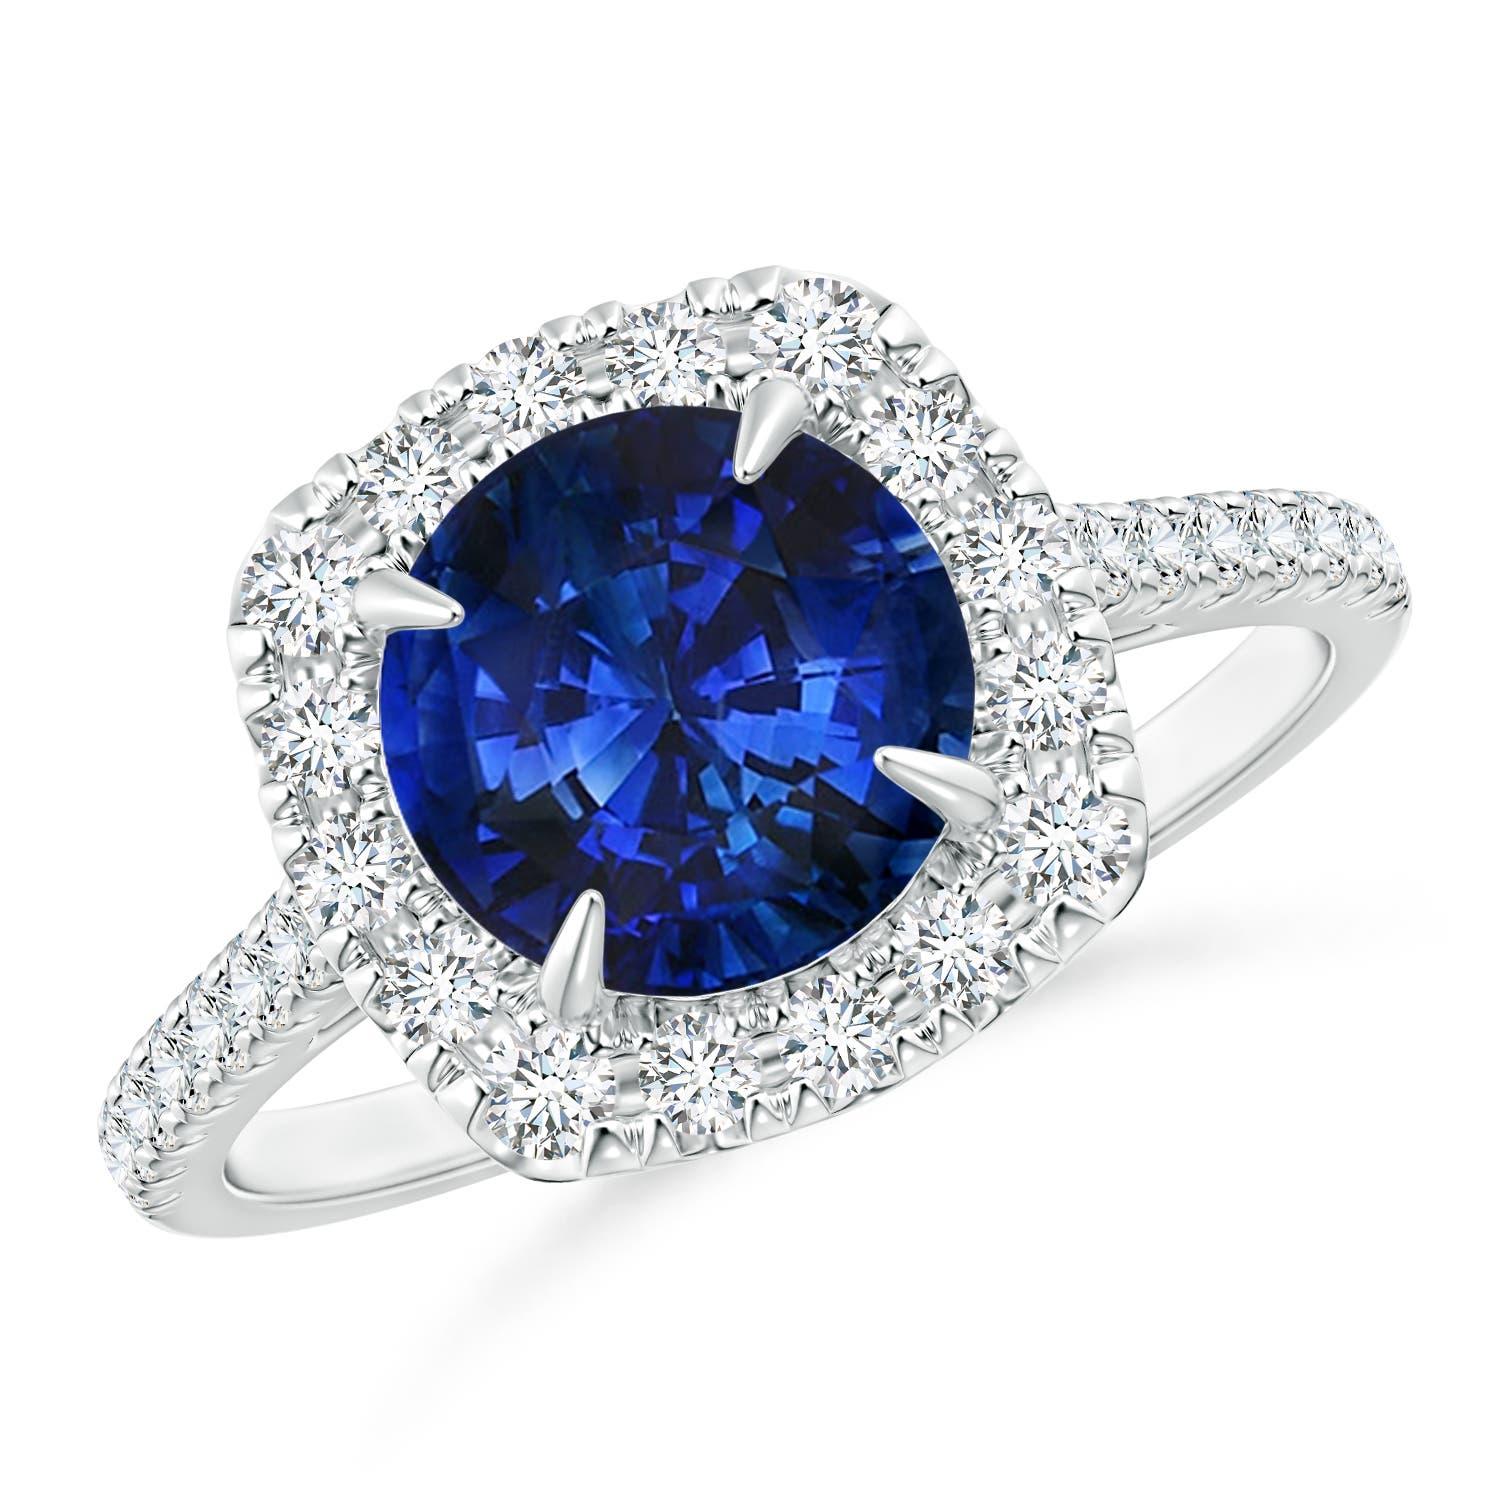 For Sale:  Angara Gia Certified Natural Sapphire Classic Cushion Halo Ring in White Gold